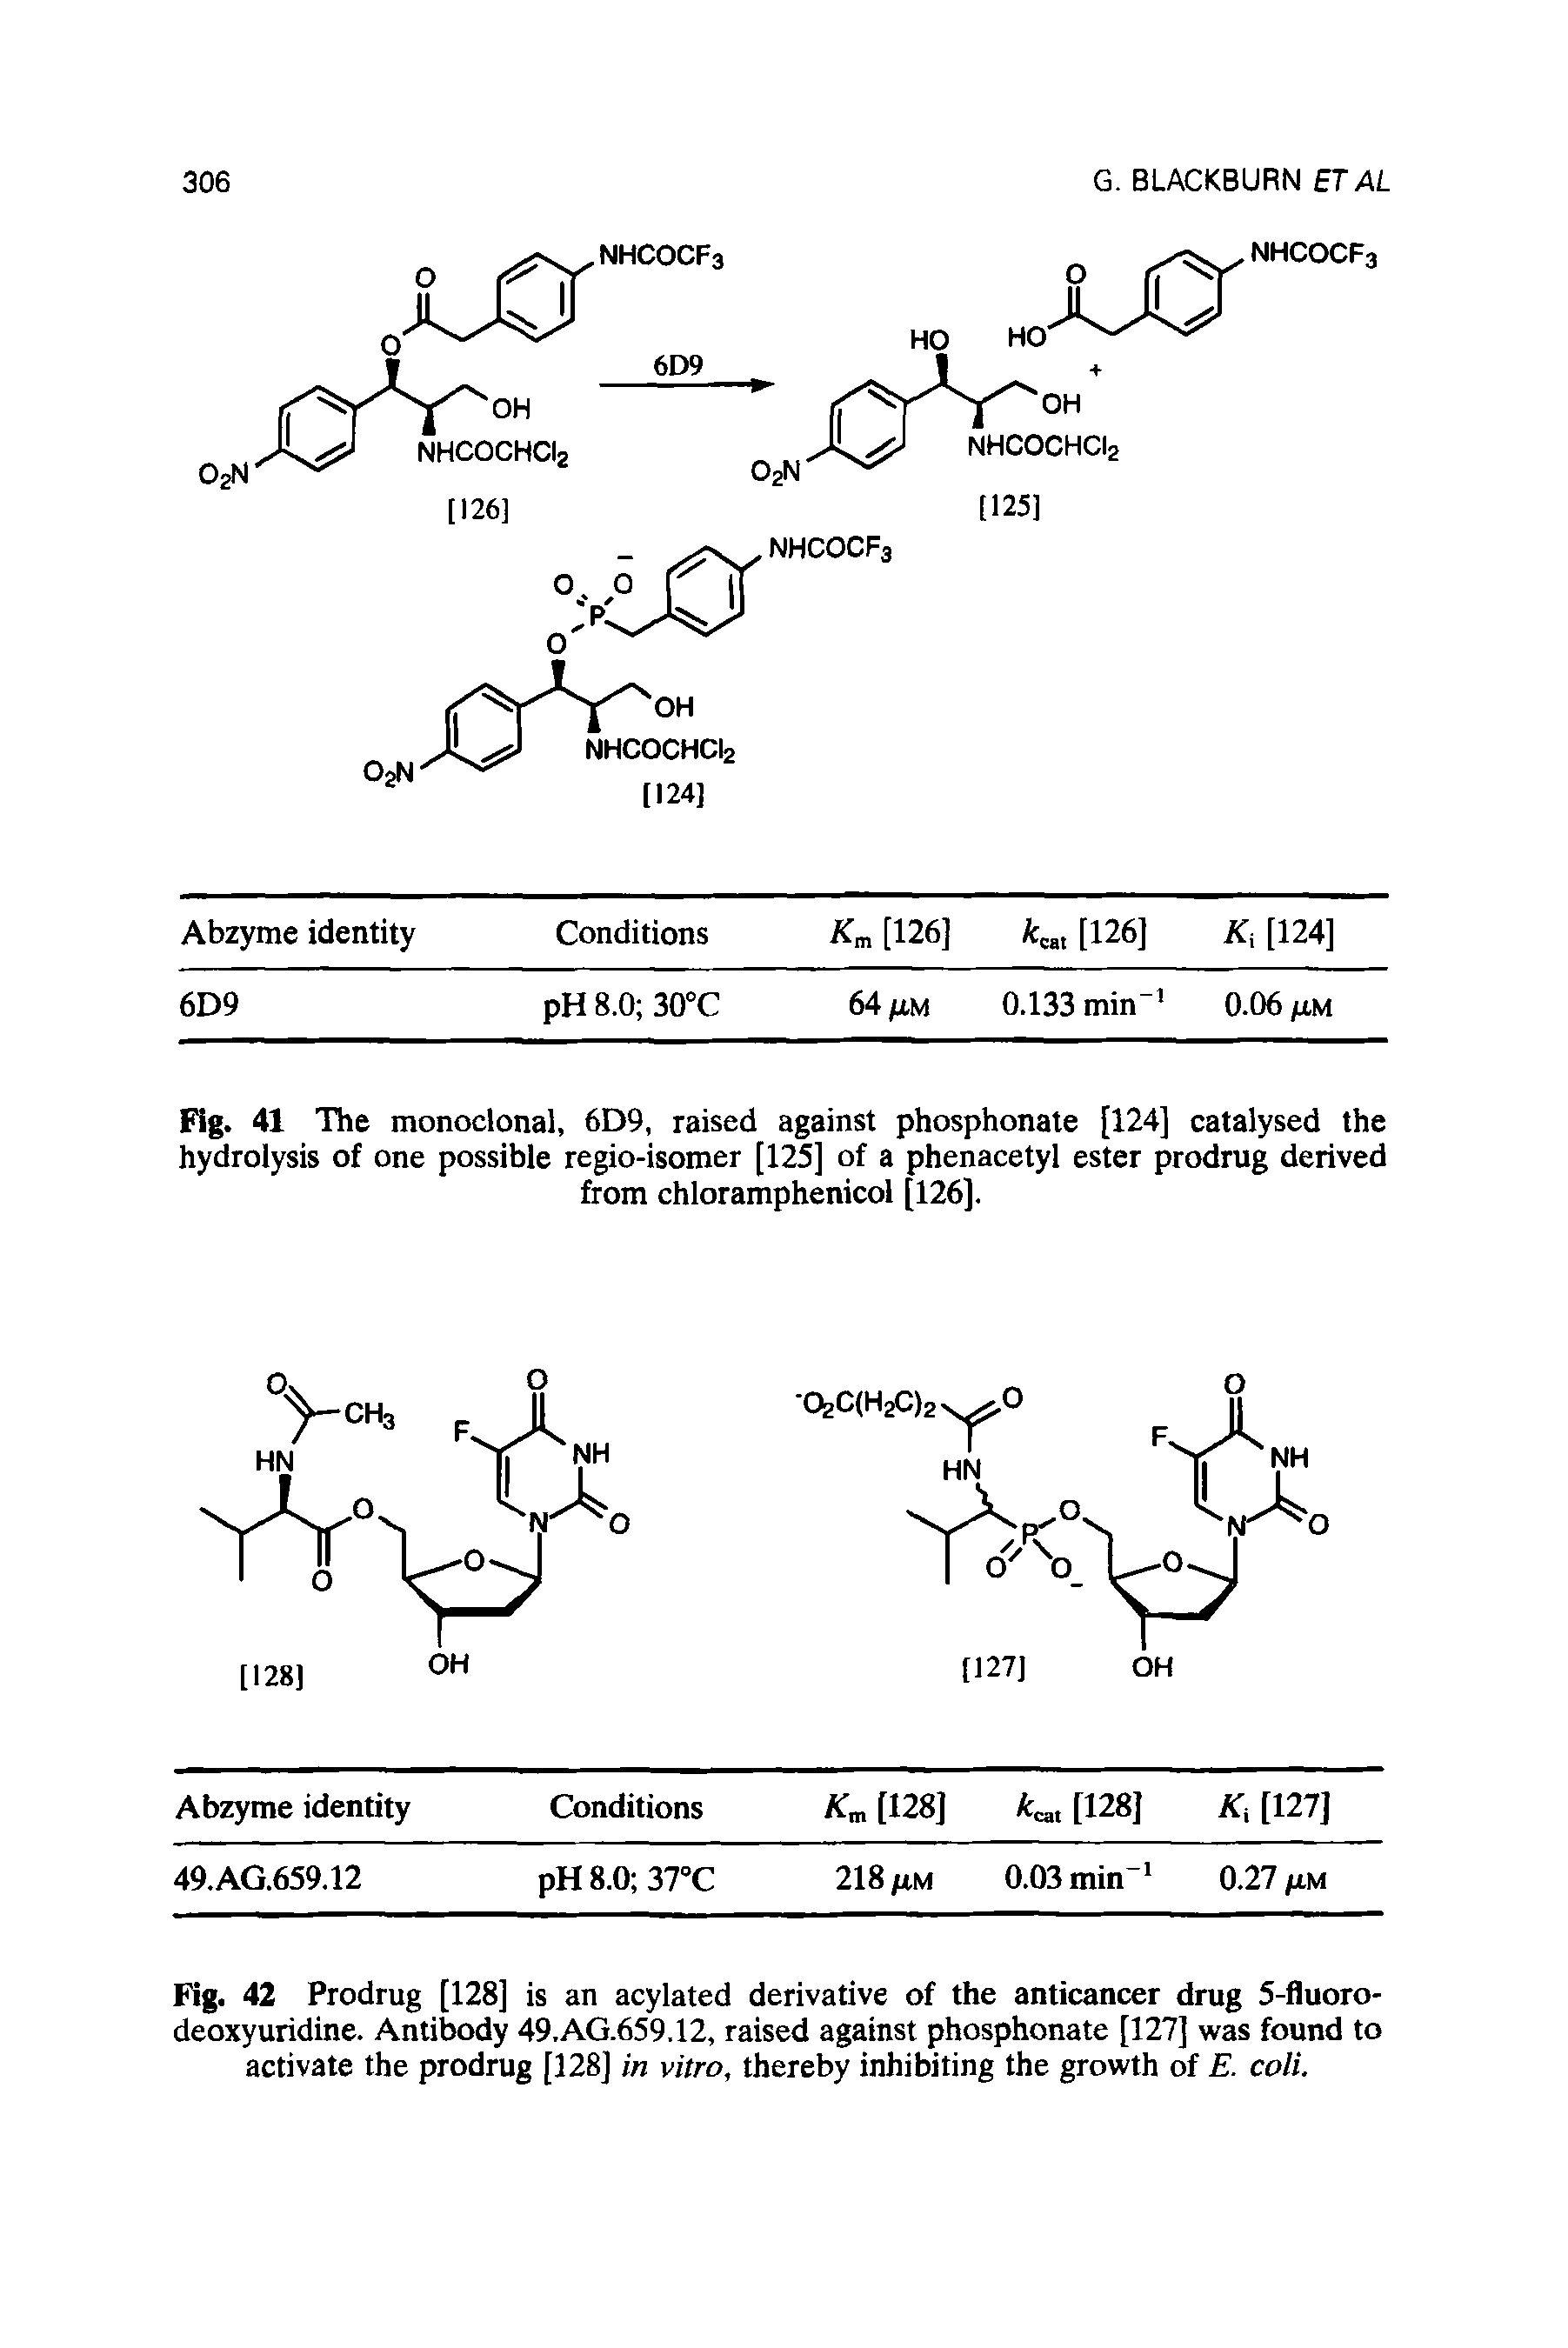 Fig. 41 The monoclonal, 6D9, raised against phosphonate [124] catalysed the hydrolysis of one possible regio-isomer [125] of a phenacetyl ester prodrug derived...